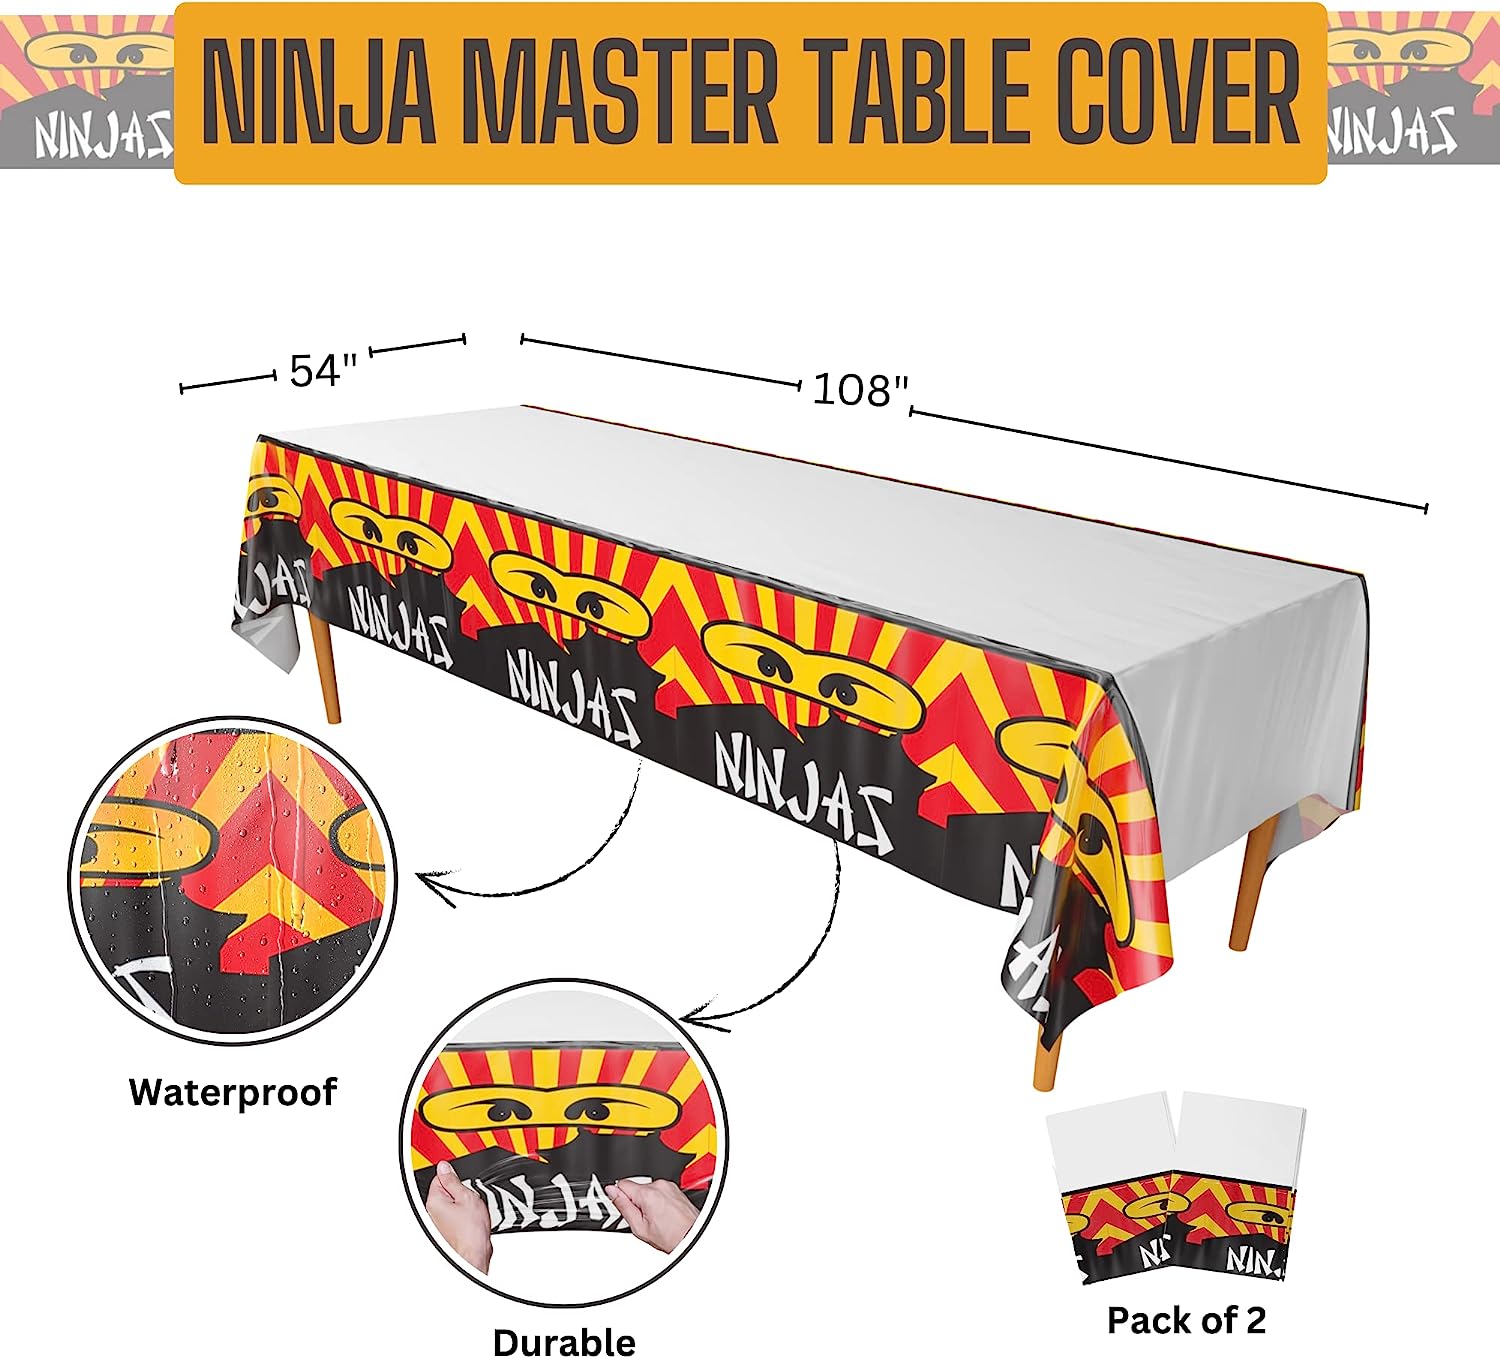 Image of two plastic table covers with a Ninja Master Deluxe theme, measuring approximately 108" x 54" each, suitable for use in parties with a ninja or martial arts theme.